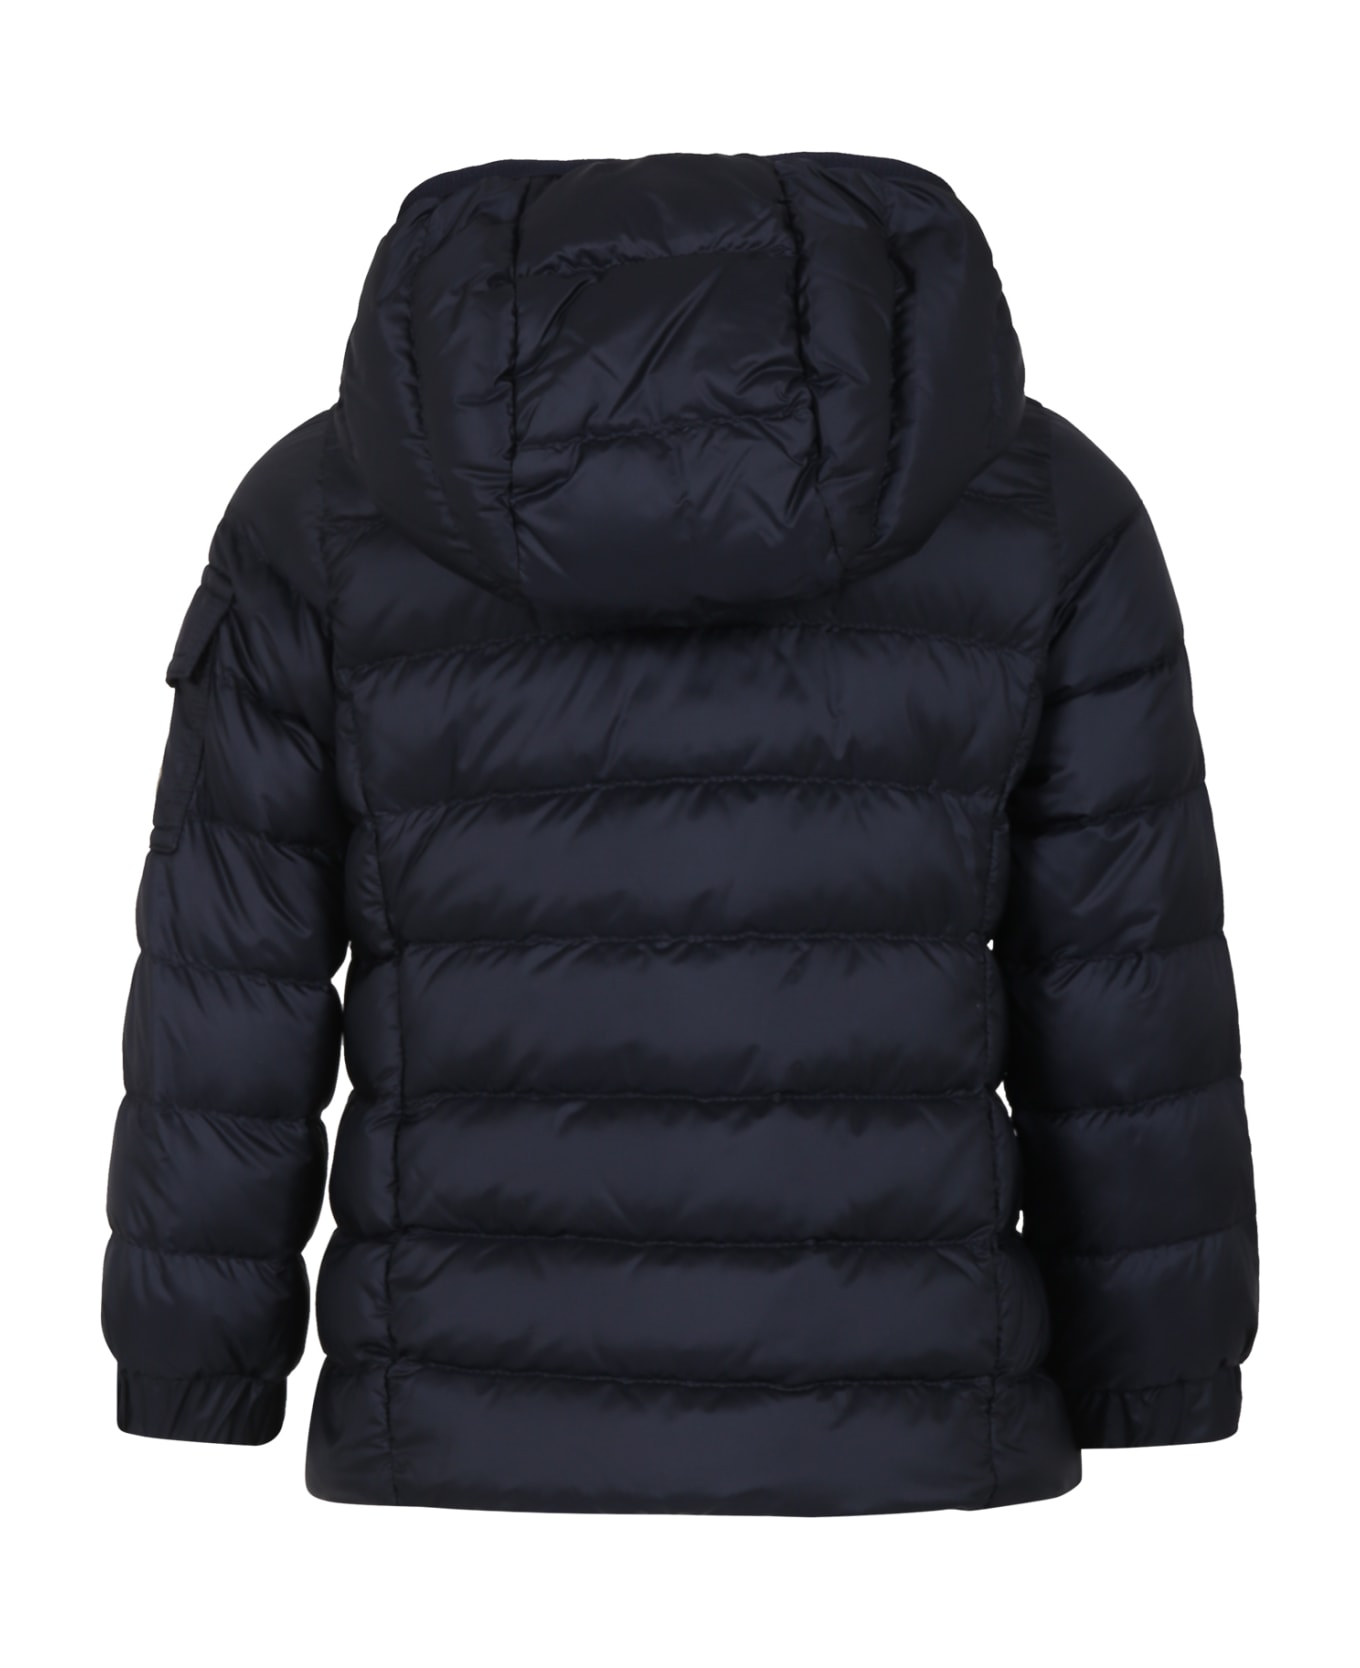 Moncler Down Jacket With Hood For Girl - Blue